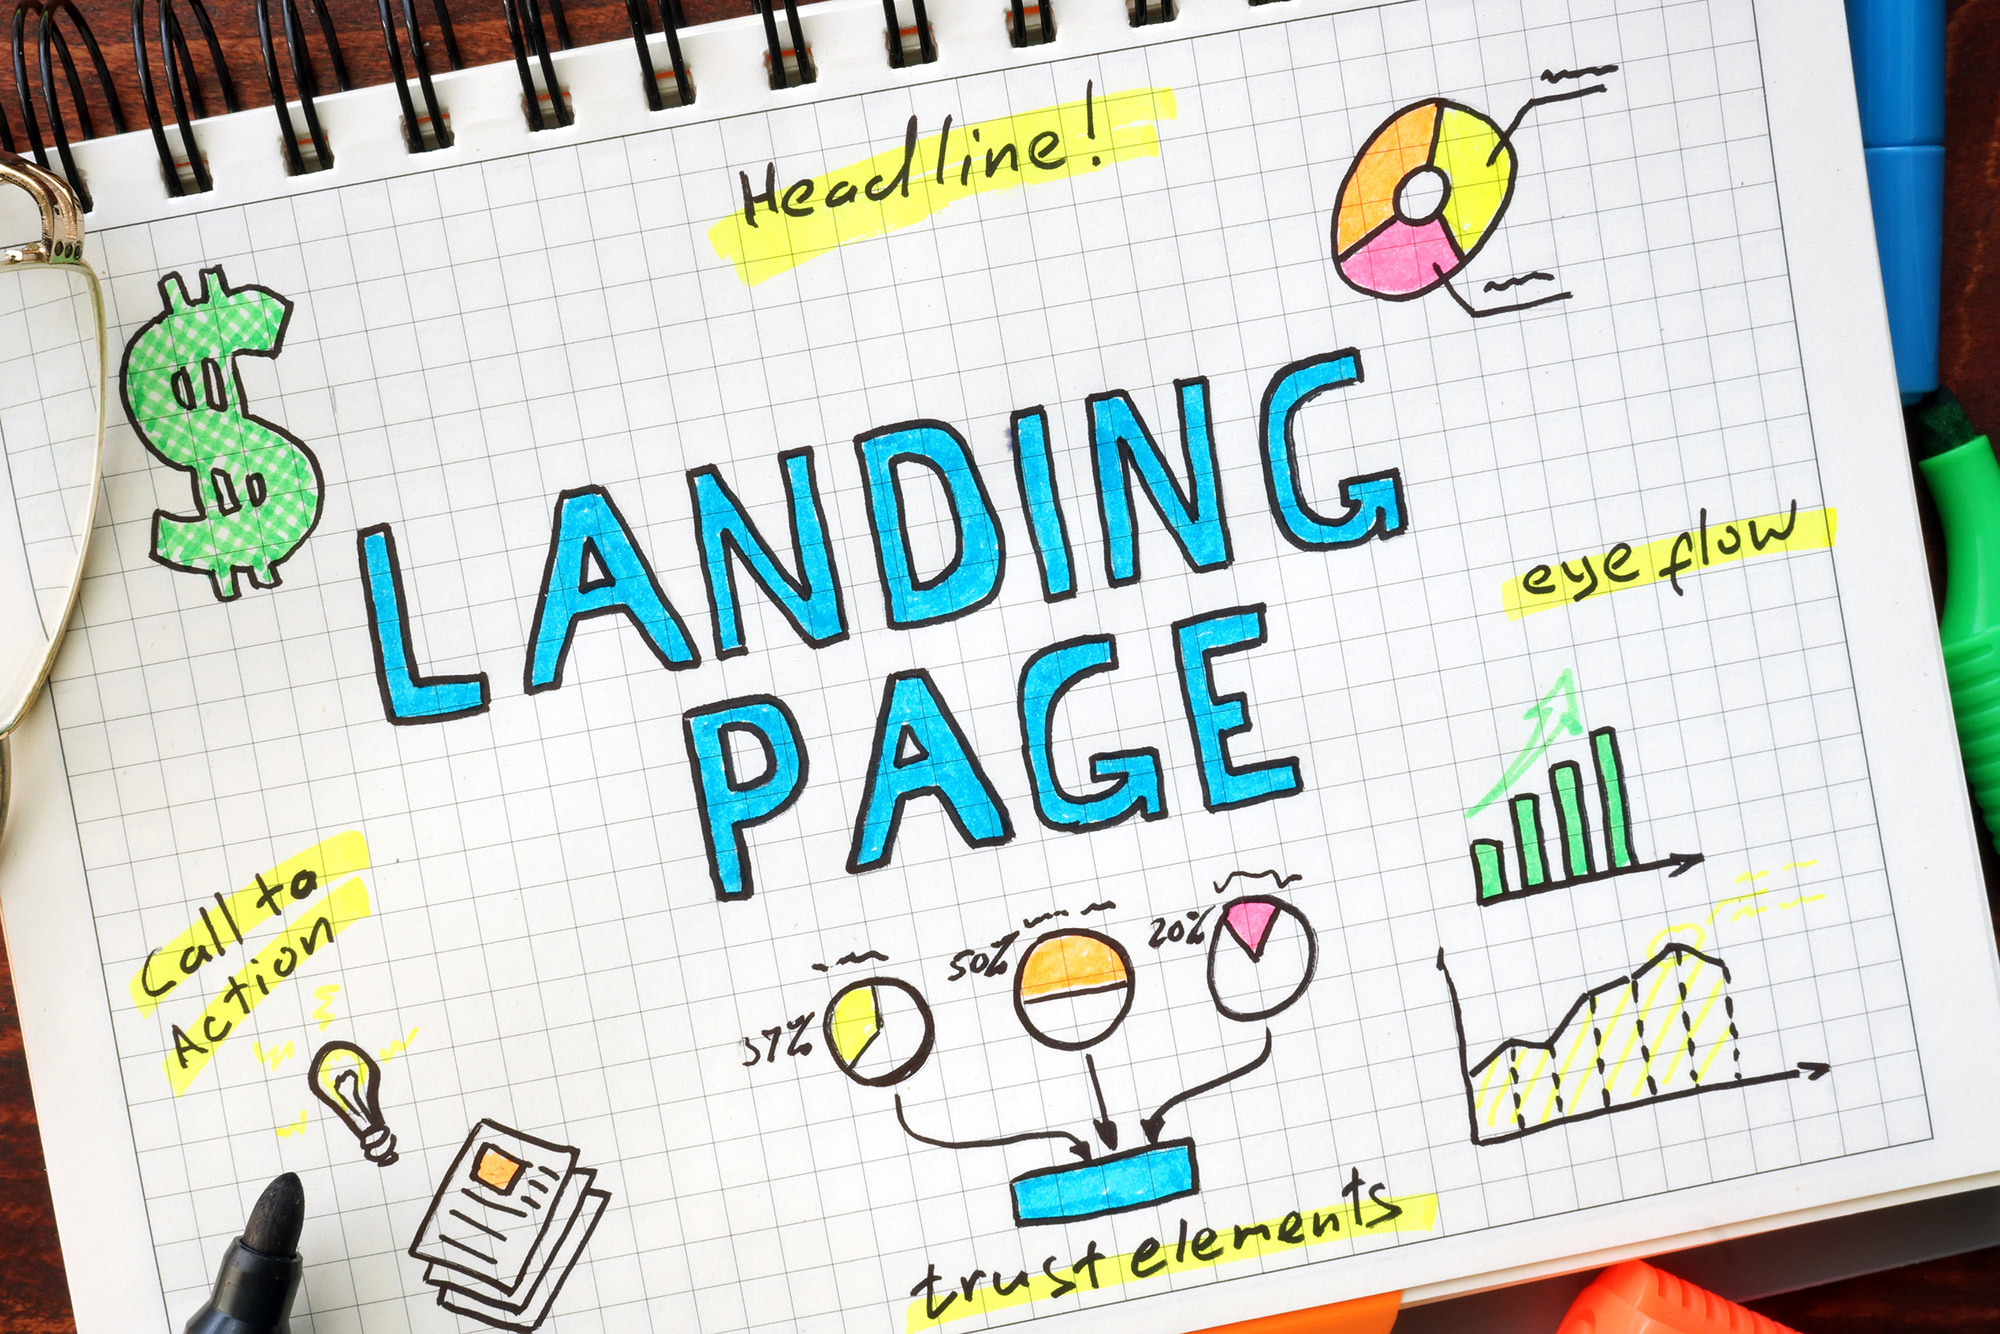 5 Essential Features of a Good Landing Page